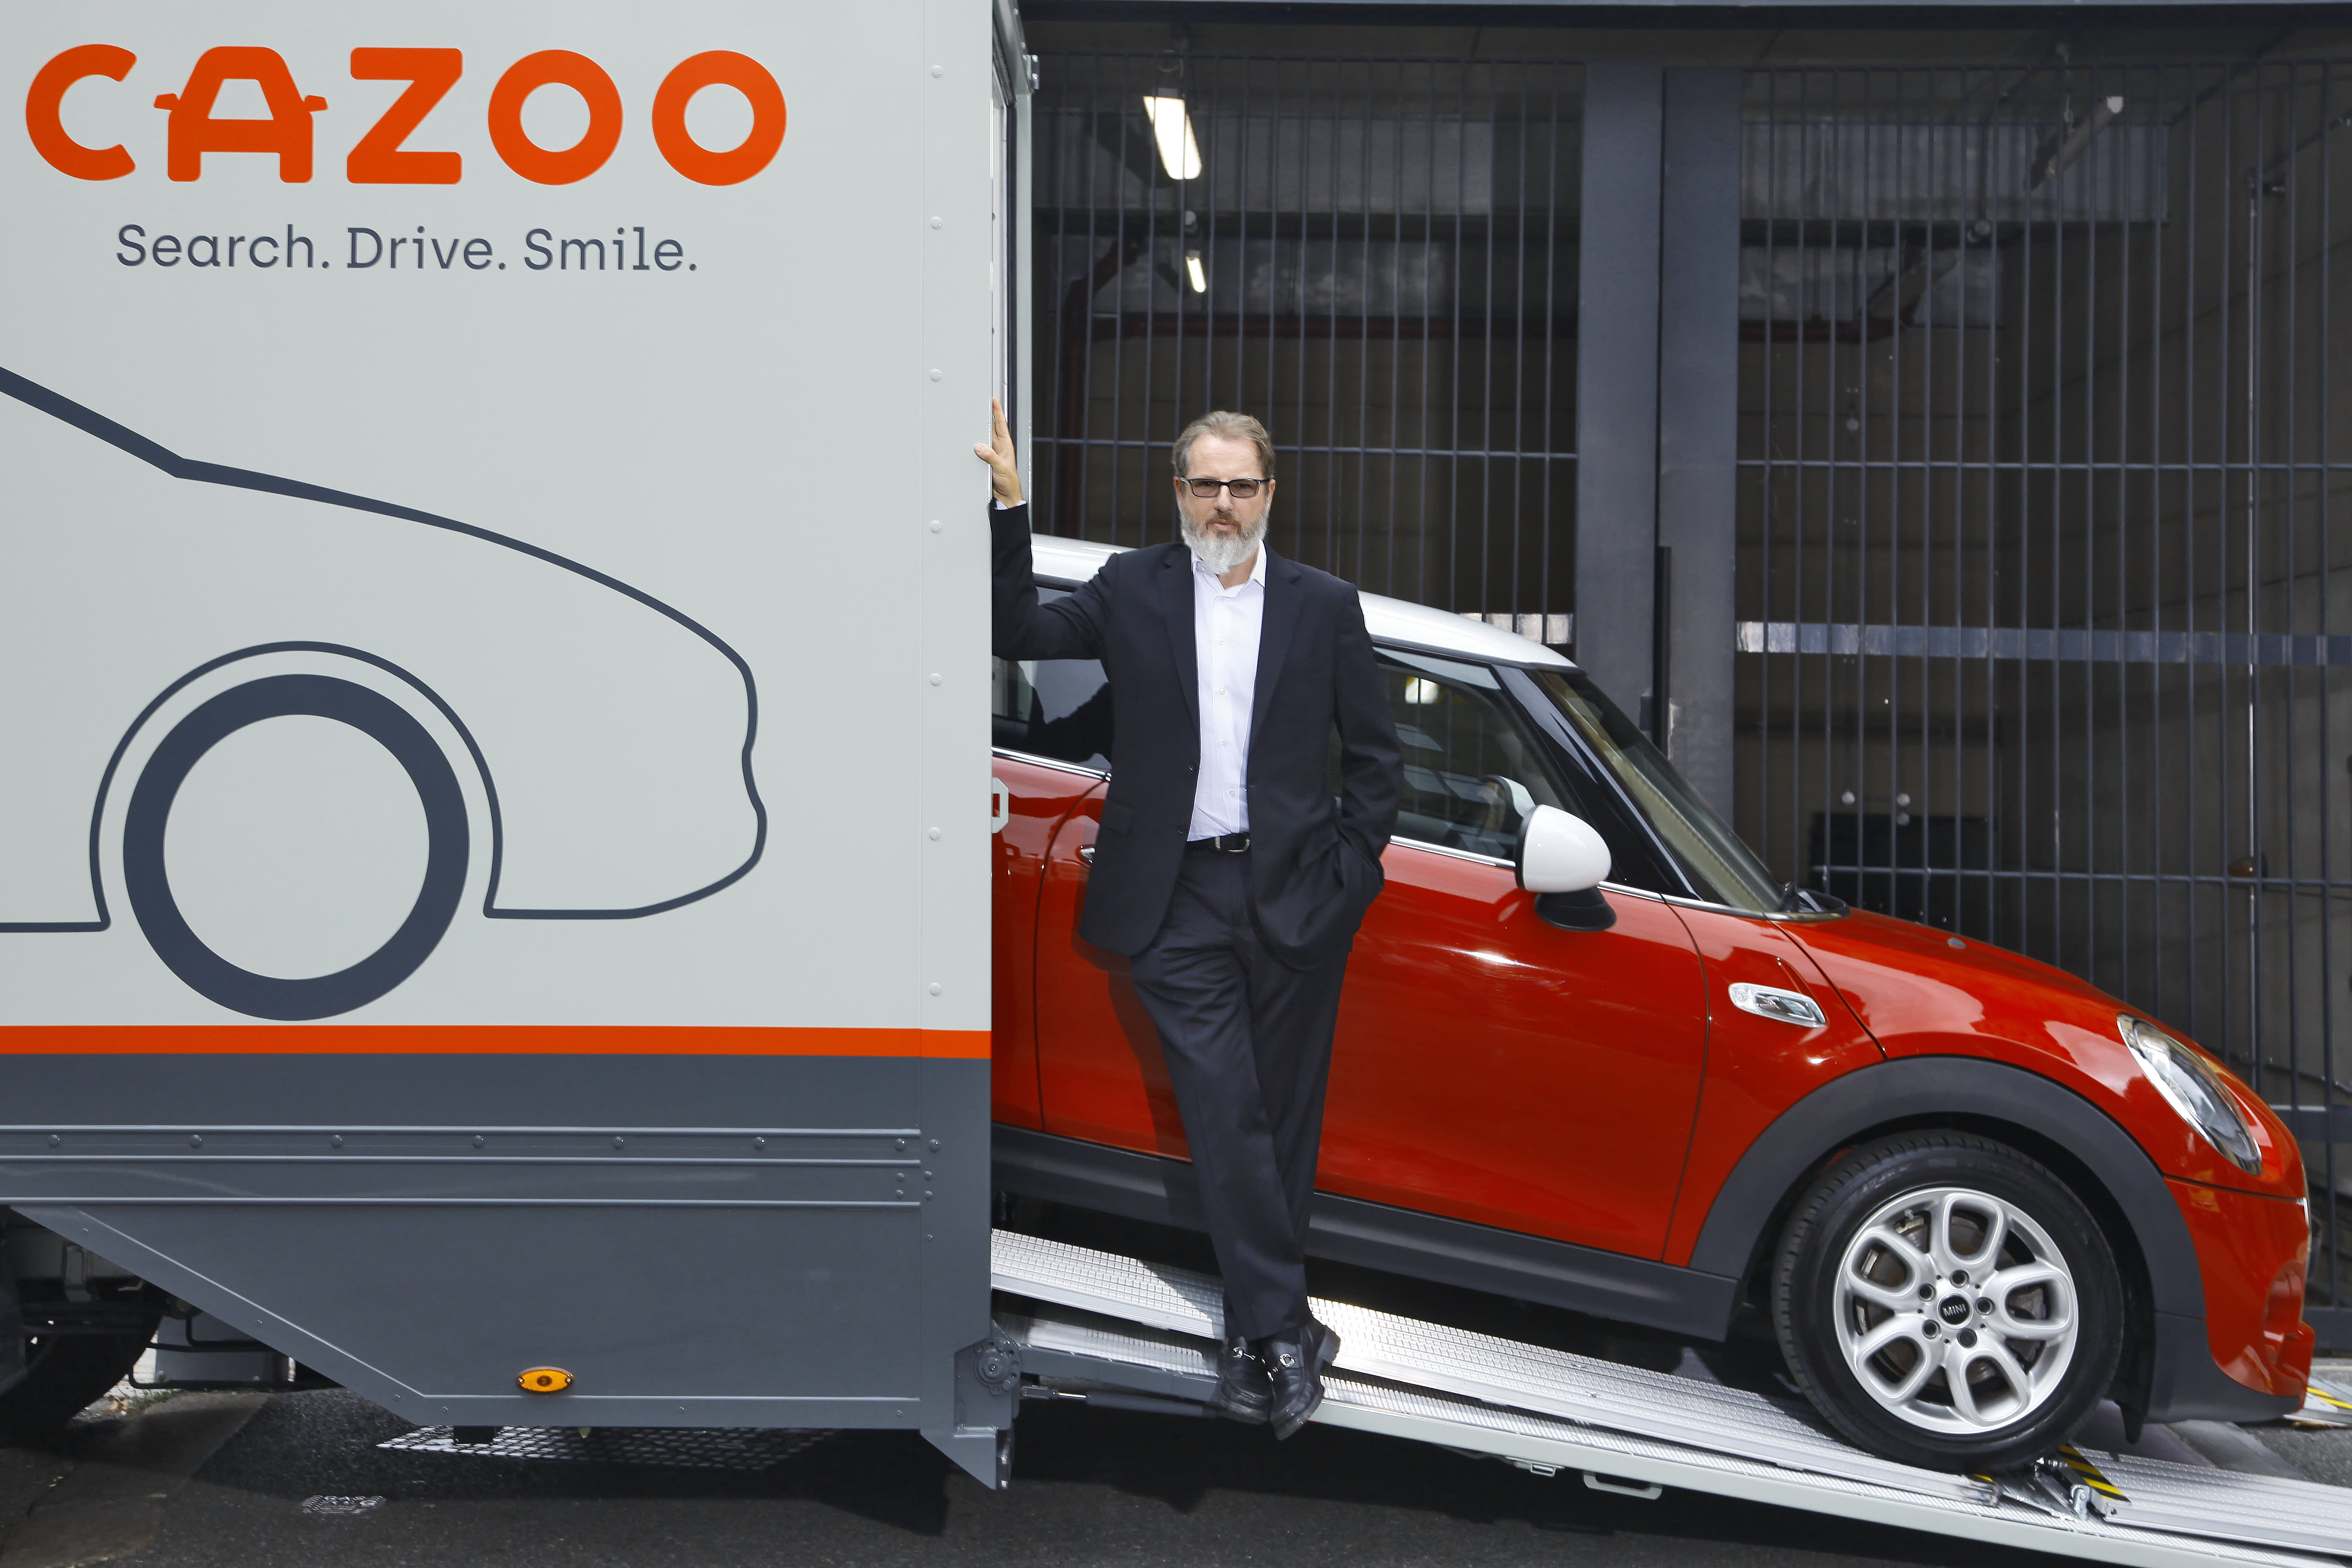 British used car dealer Cazoo is going public in the US via SPAC